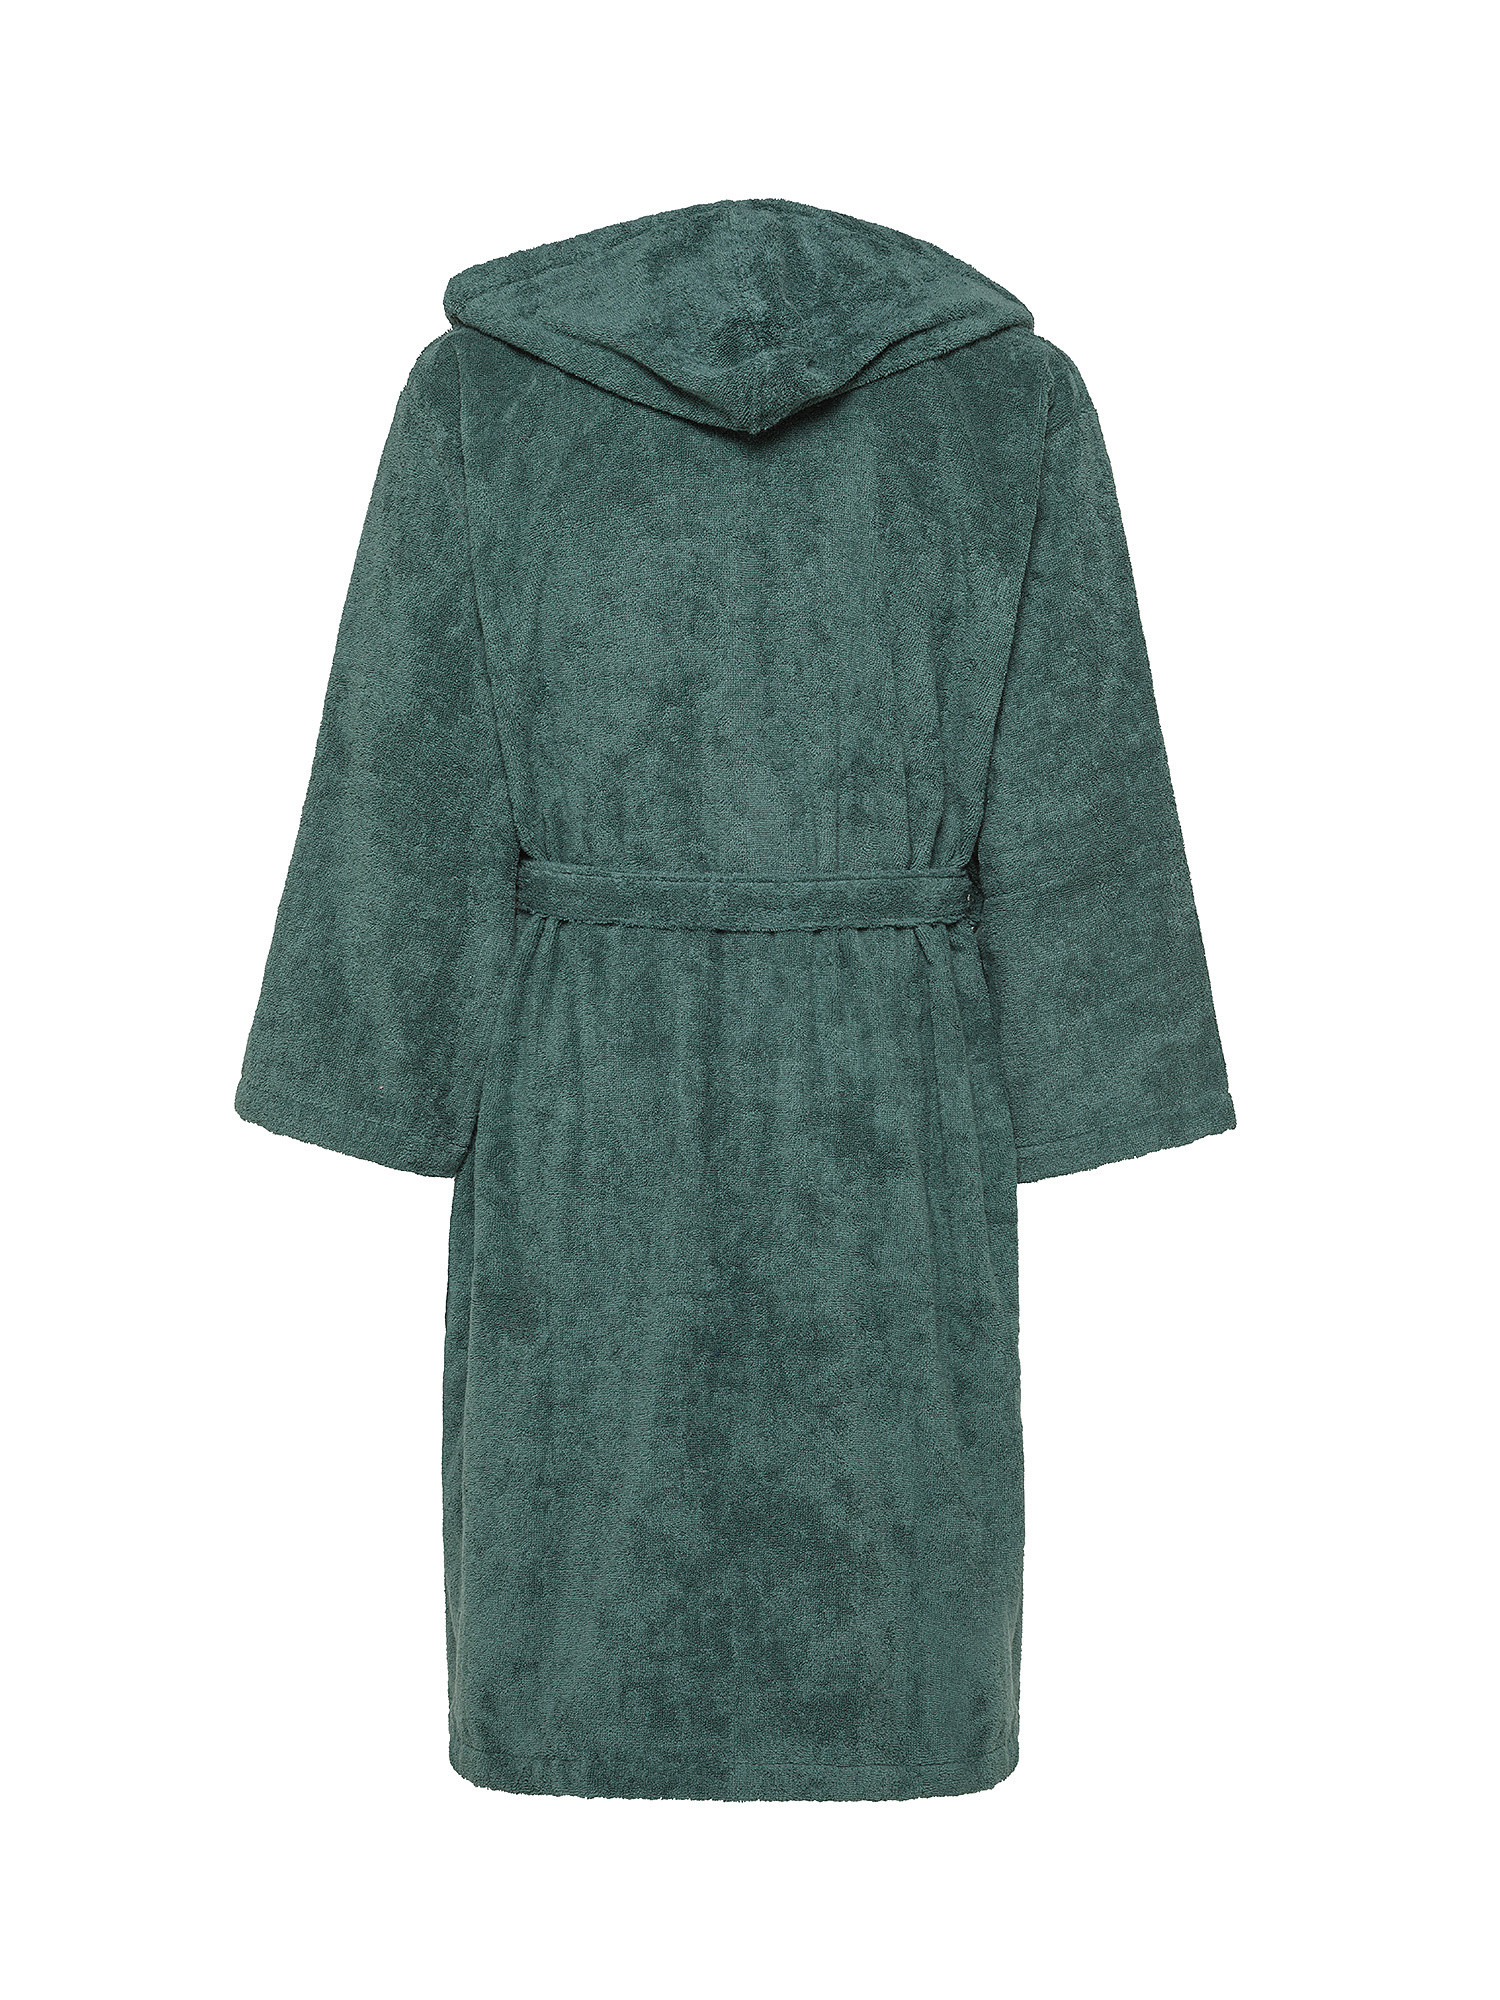 Zefiro solid color 100% cotton bathrobe, Light Green, large image number 1